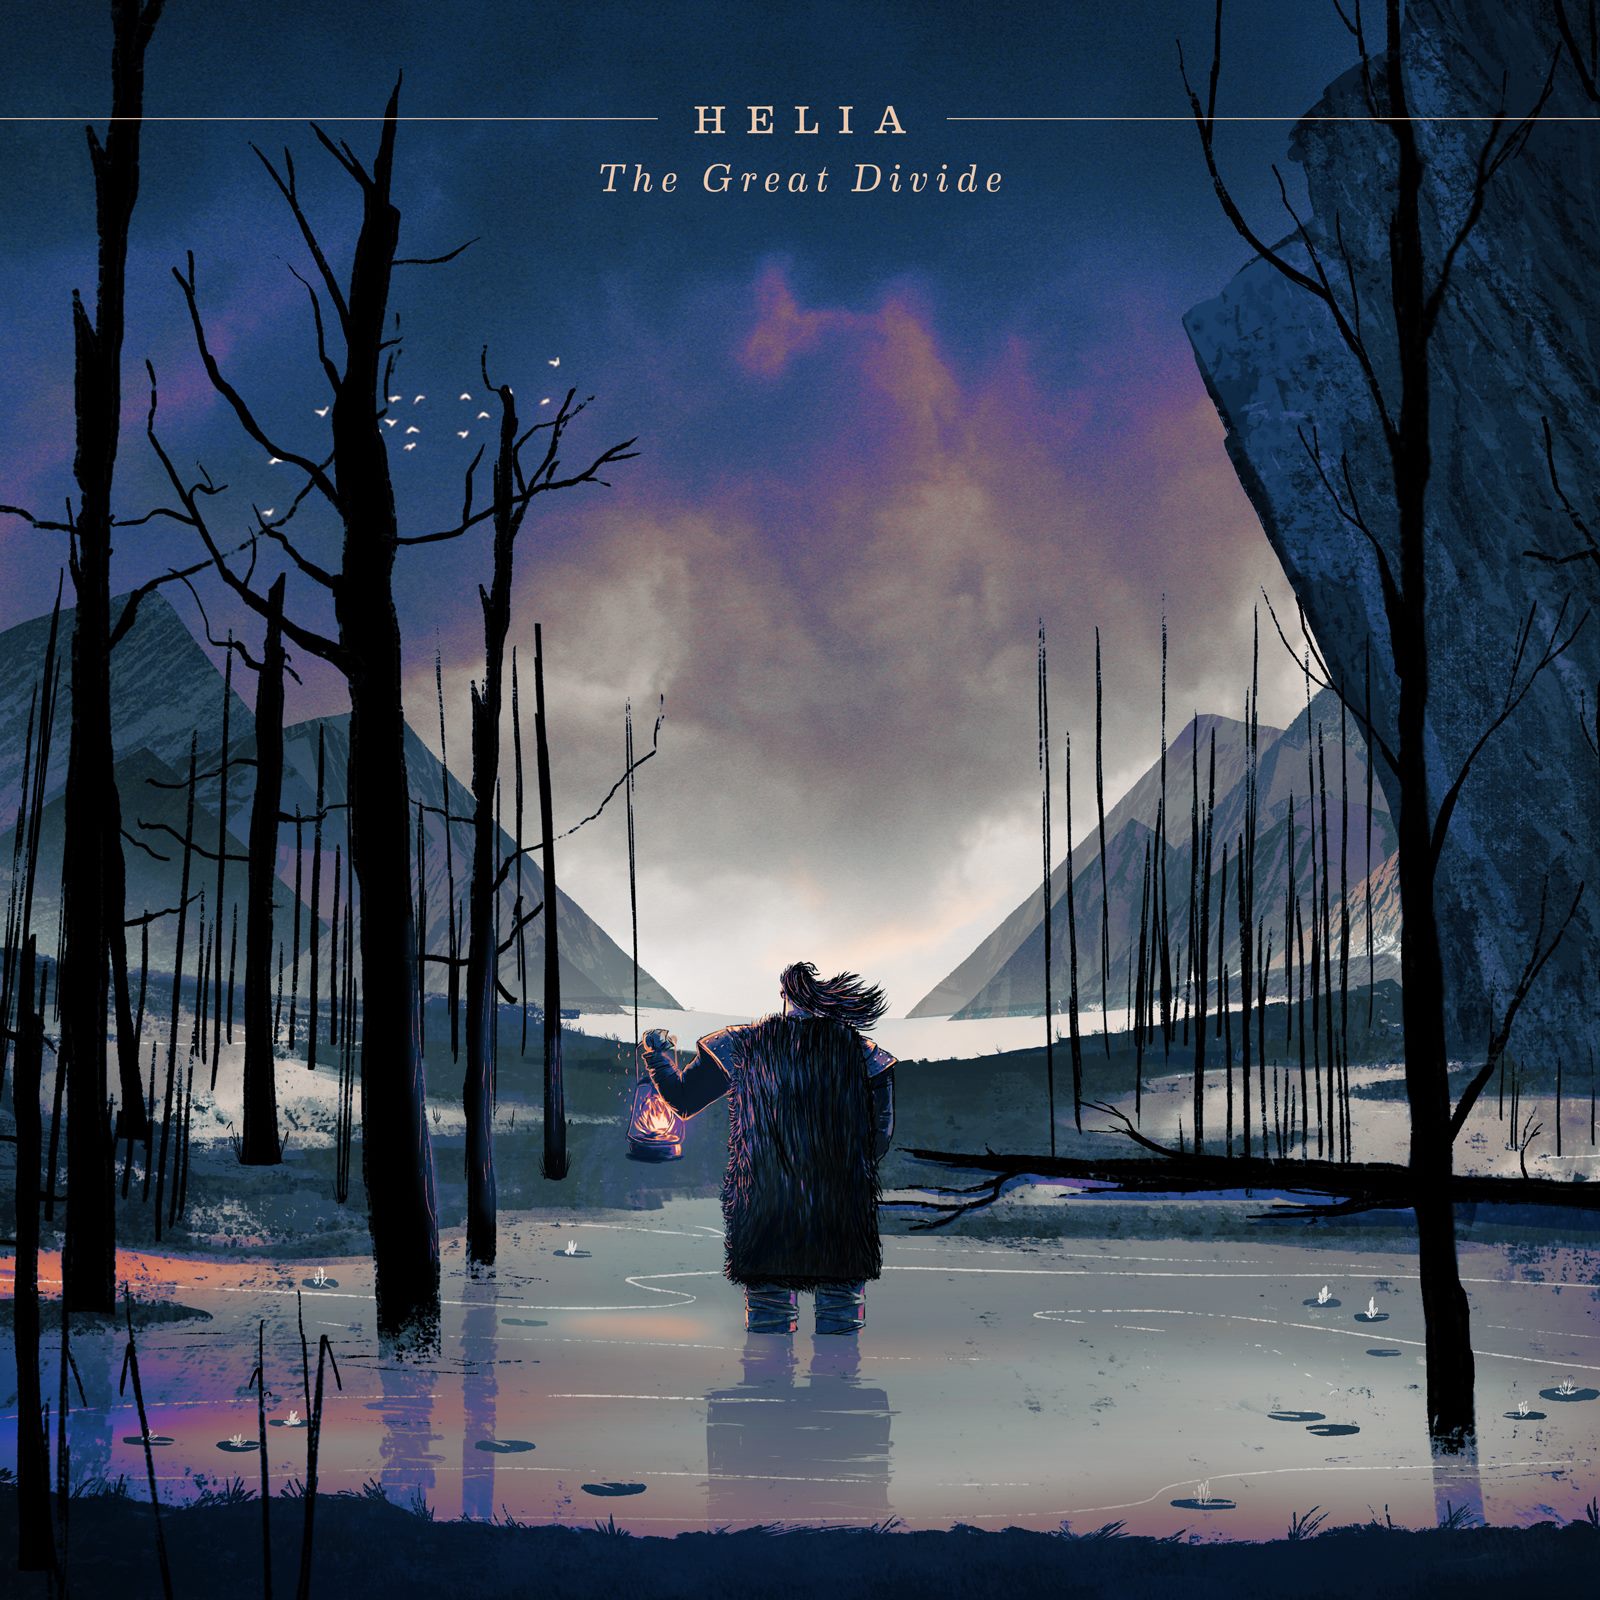 Helia - The Great Divide [Full Album Preview] (2014)